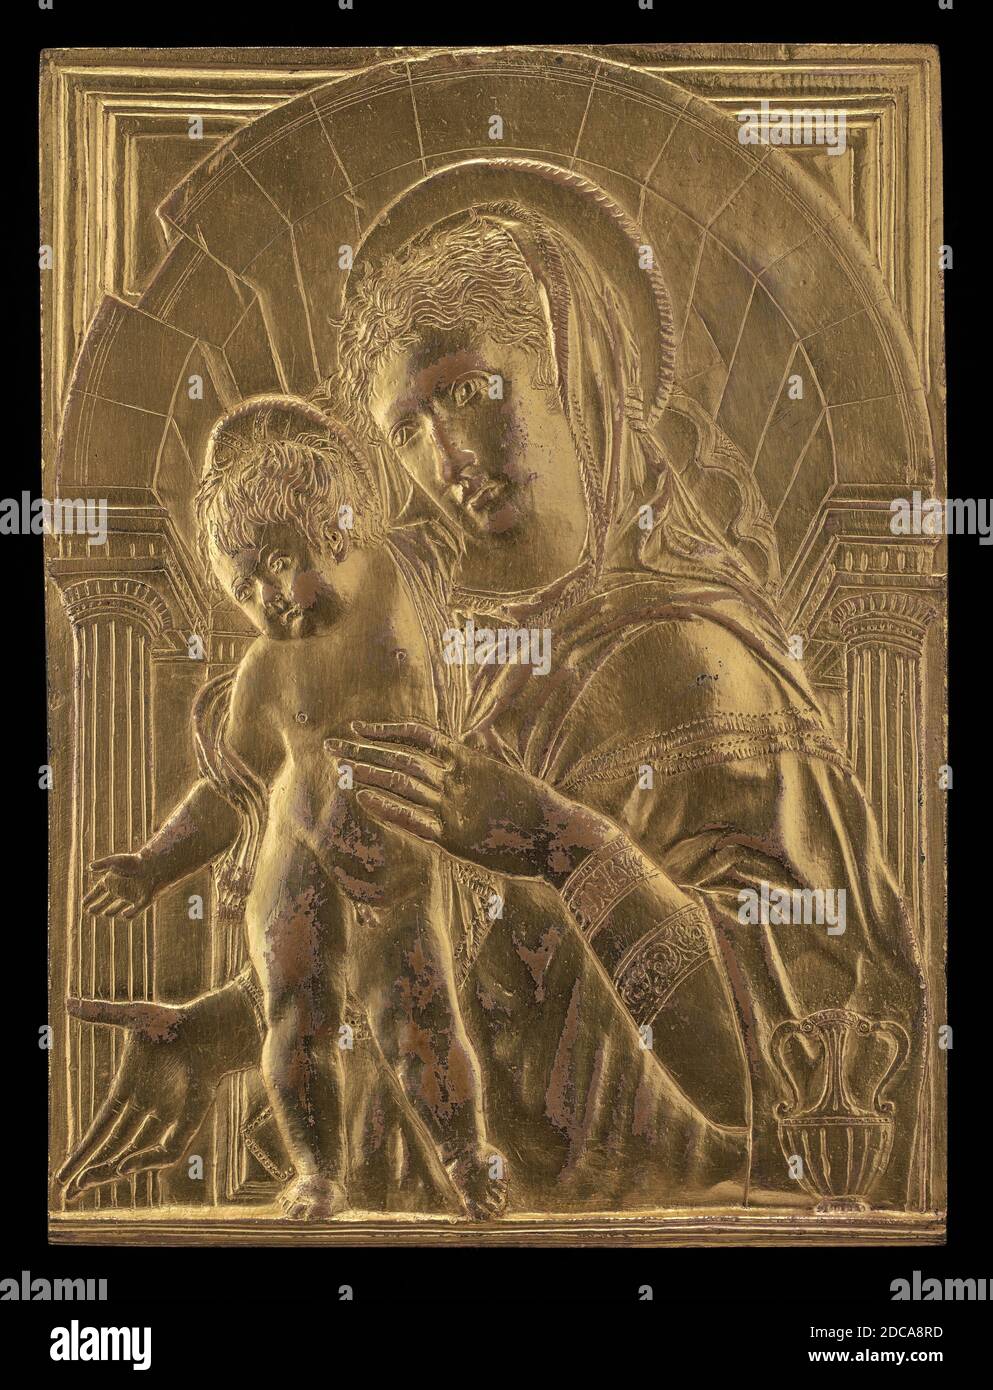 Anonymous Artist, (sculptor), Donatello, (related artist), Florentine, c. 1386 - 1466, Madonna and Child within an Arch, mid 15th century, gilded bronze, overall: 20.35 x 15.31 cm (8 x 6 in.), gross weight: 1334.8 gr (2.943 lb Stock Photo